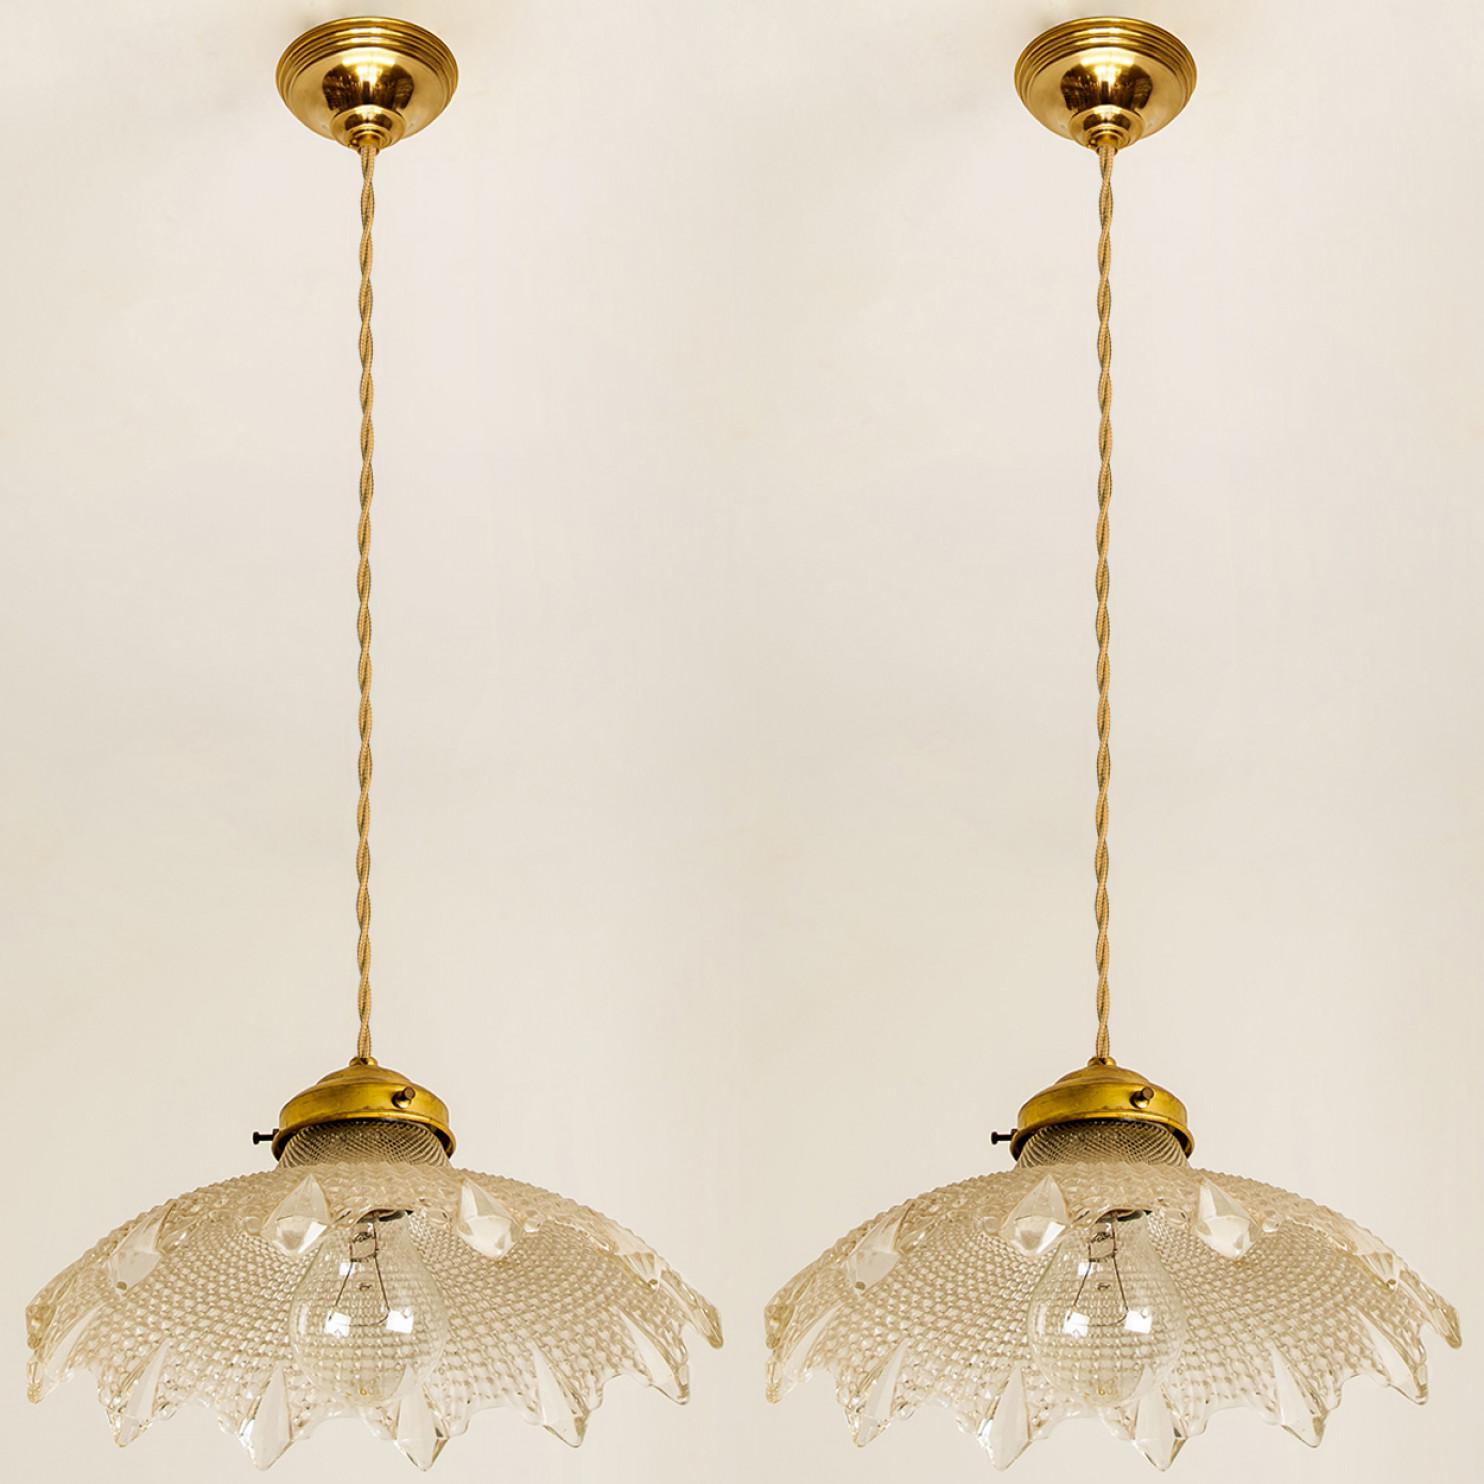 A pair of gorgeous hanging light fixture, in Art Deco style made in Europe, France. A flower-like shape with diamond glass details and a brass fixture.

A very elegant piece which is highly suited for just about any room. We can deliver different